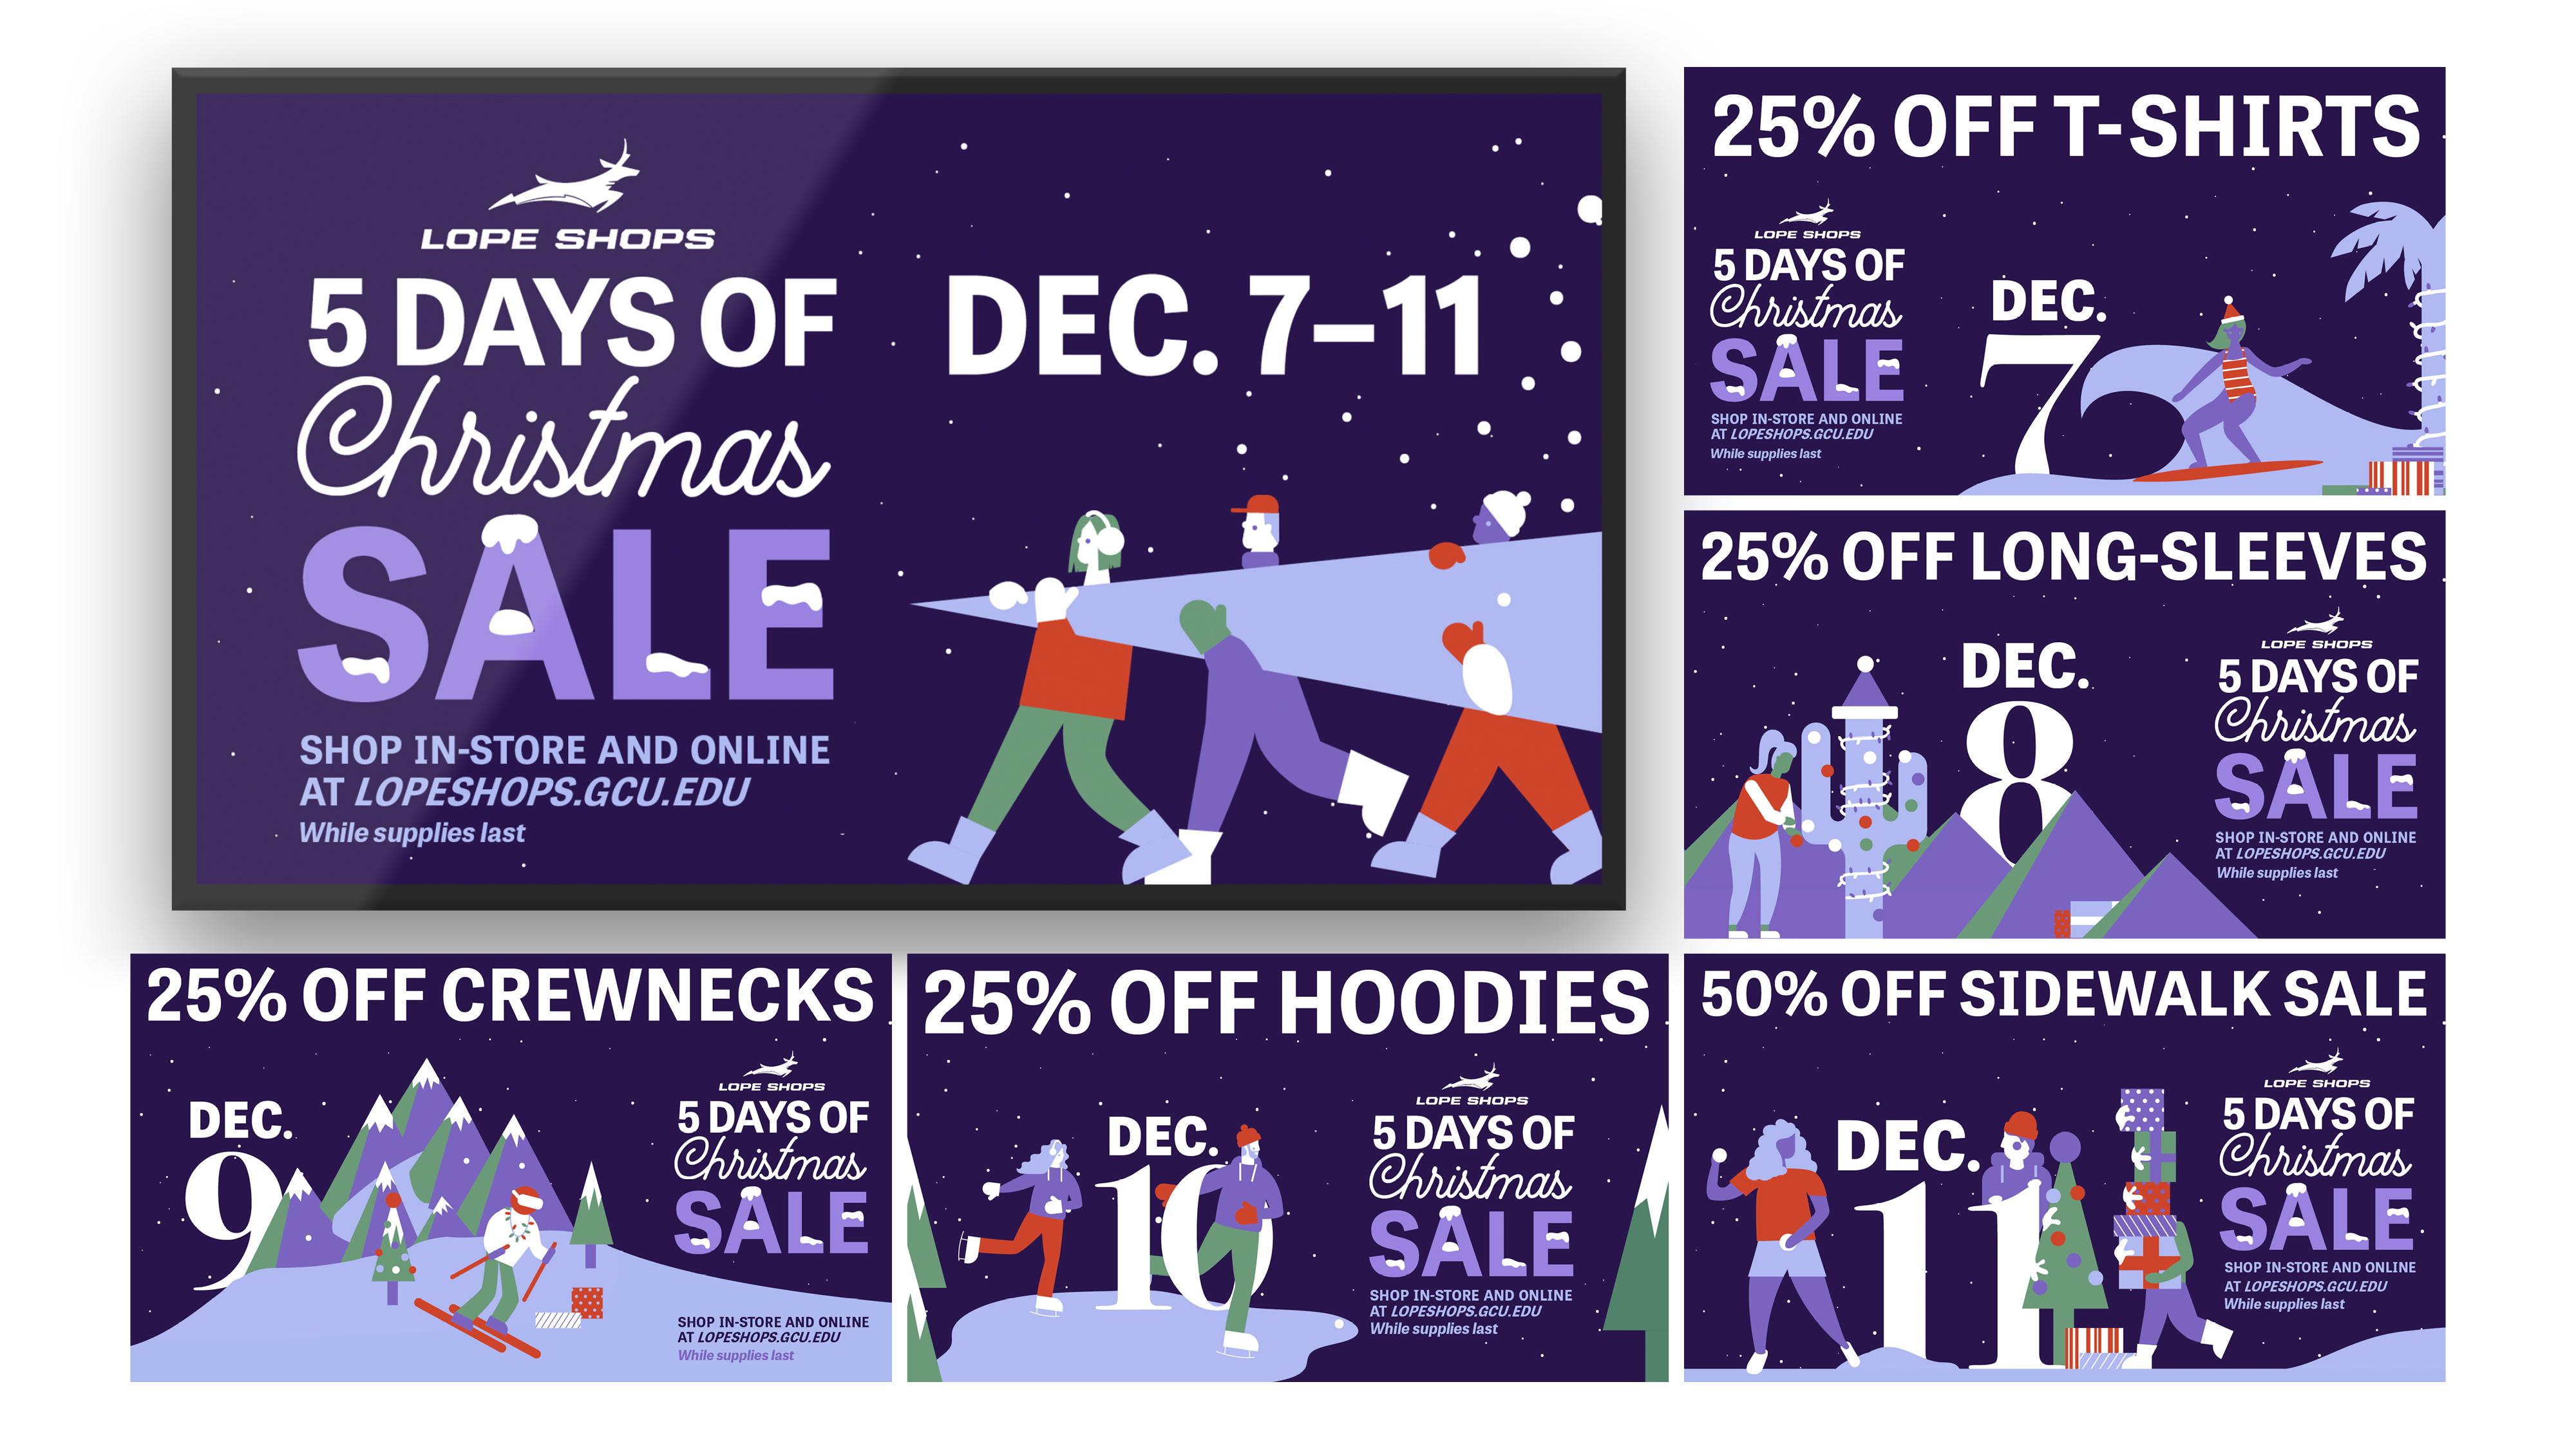 featured image three:Lope Shops 5 Days of Christmas Sale